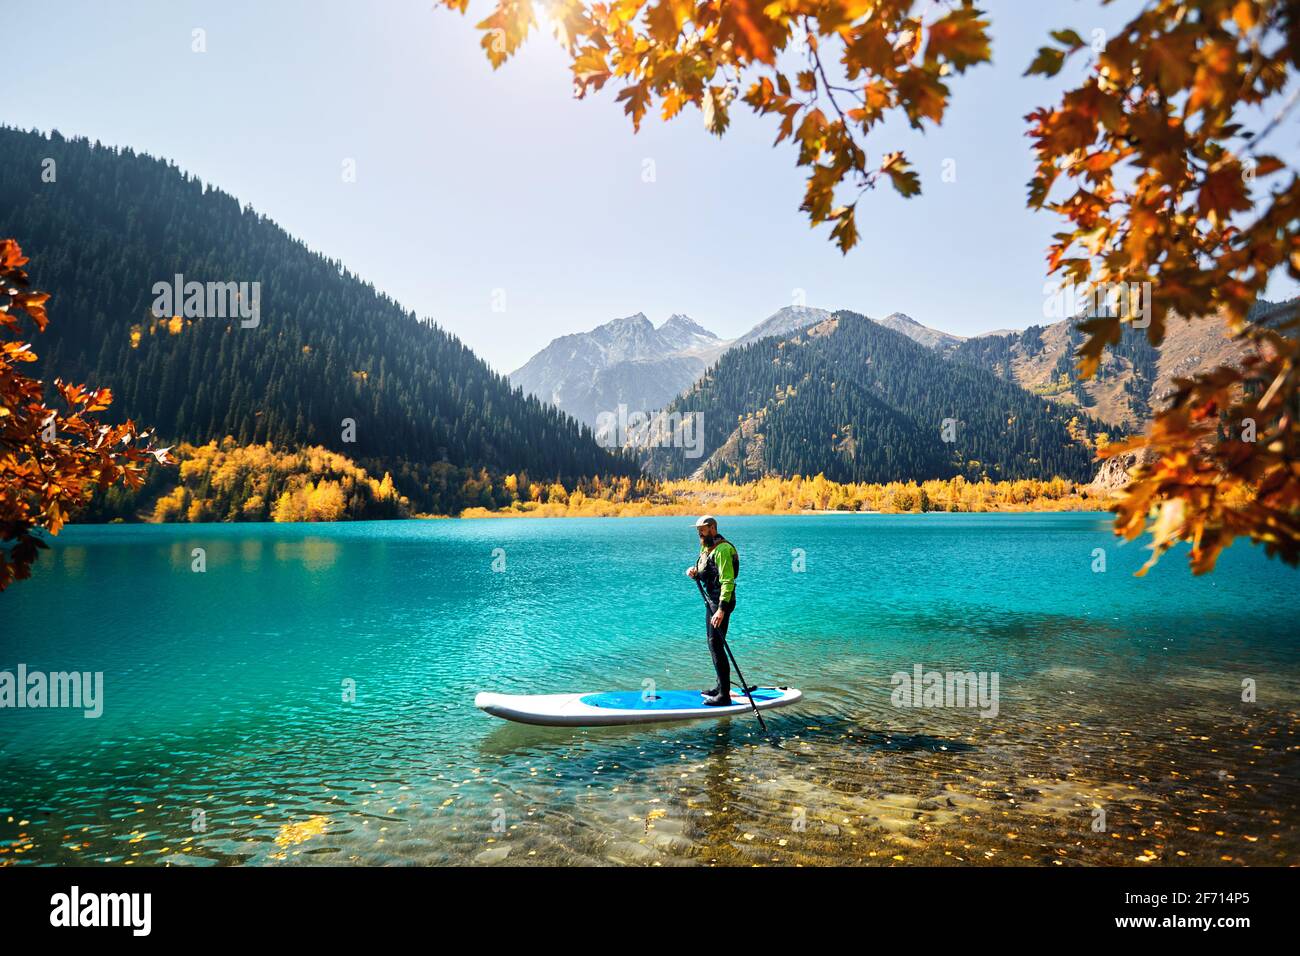 Man floating on a SUP board at mountain lake near yellow forest in autumn time. Adventure at Stand up paddle boarding. Stock Photo